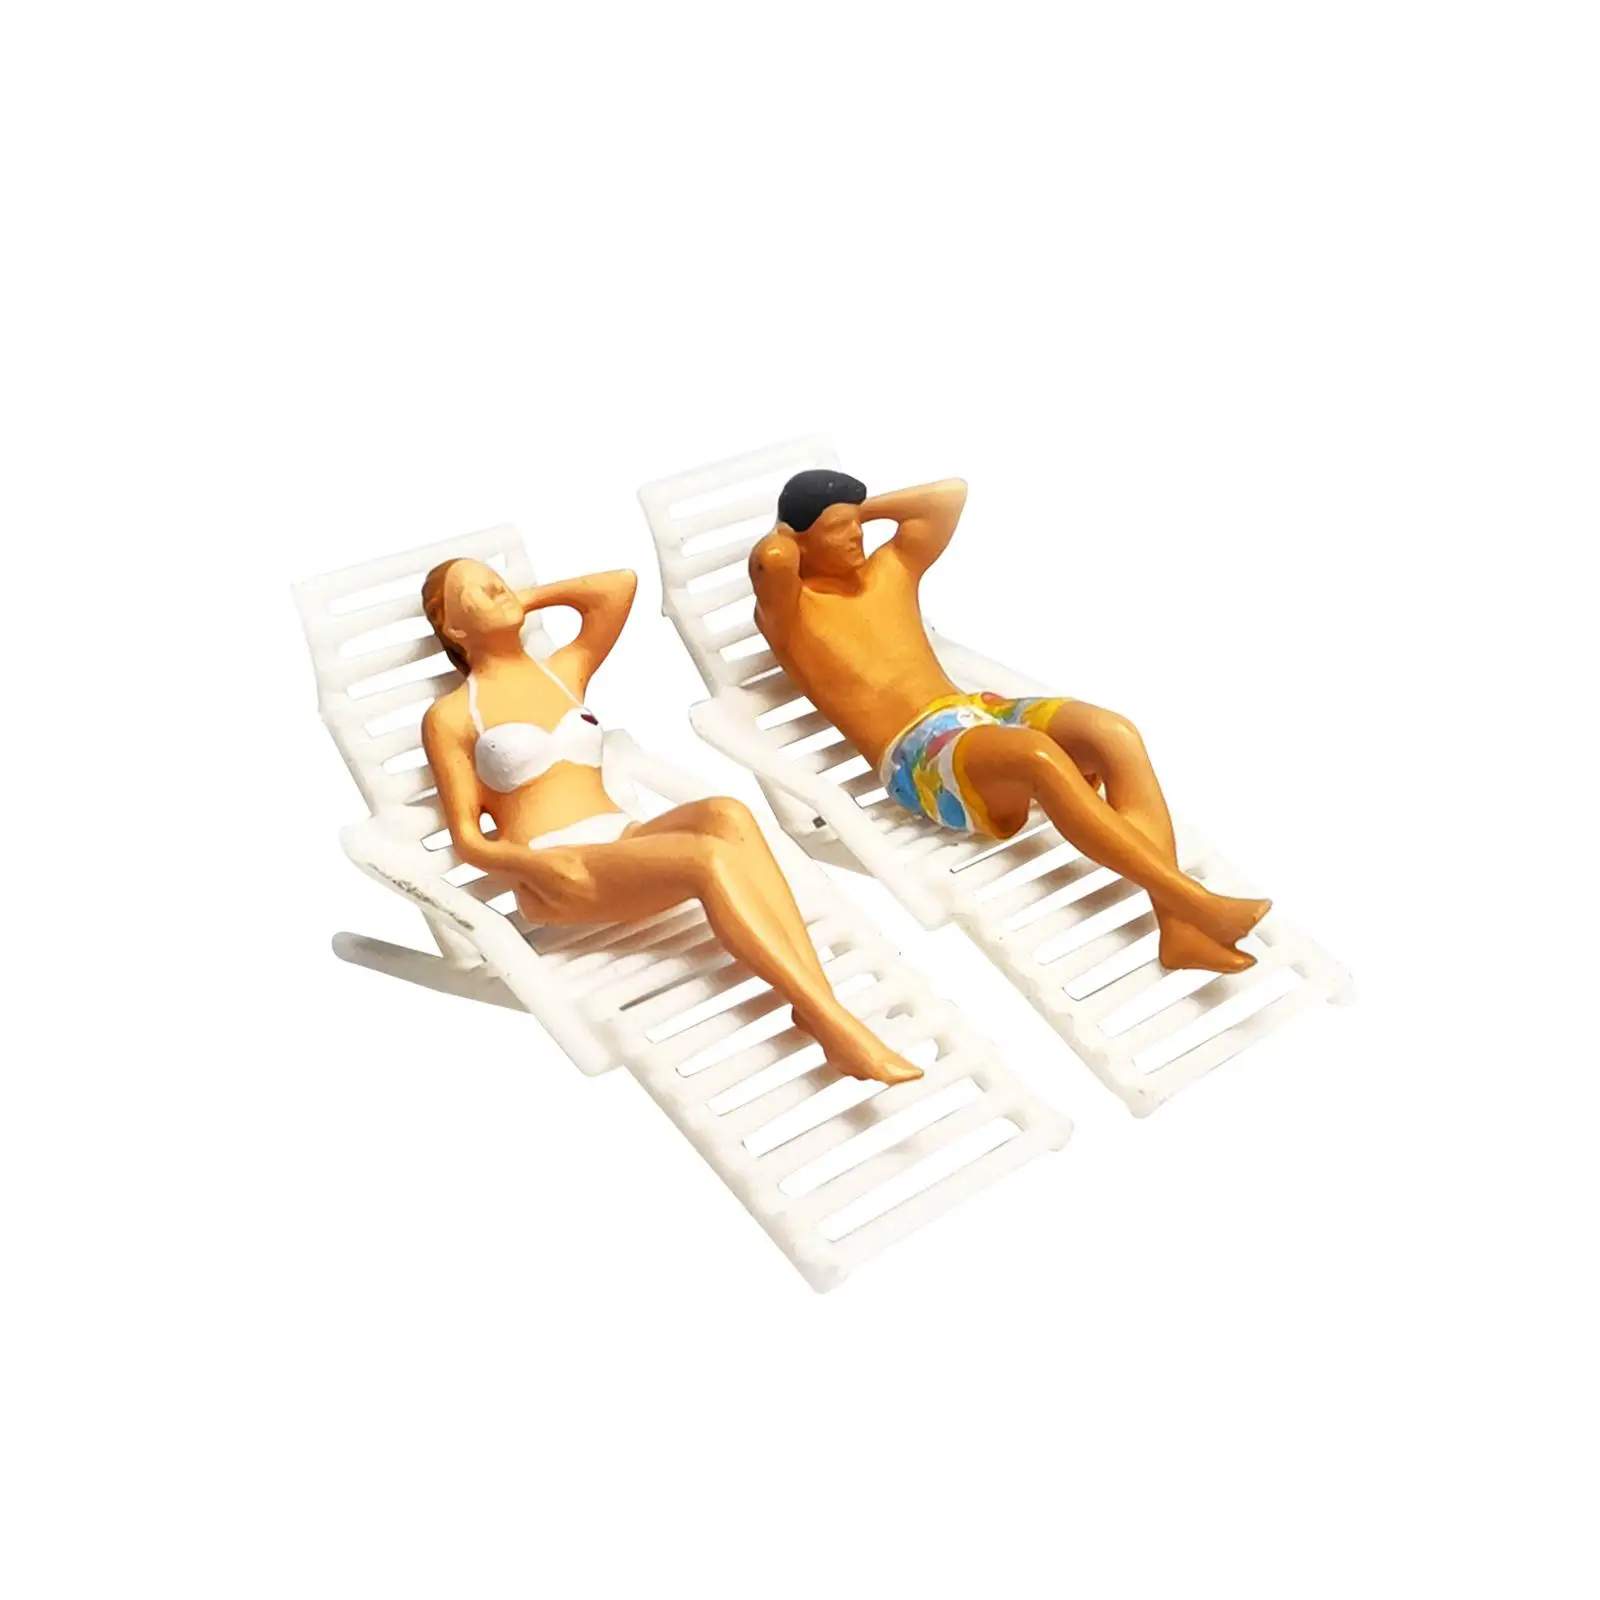 Resin 1/64 Scale People Figures Set Deck Chair Model Ornament Mini People Model for Sand Table Diorama Dollhouse Layout Decor